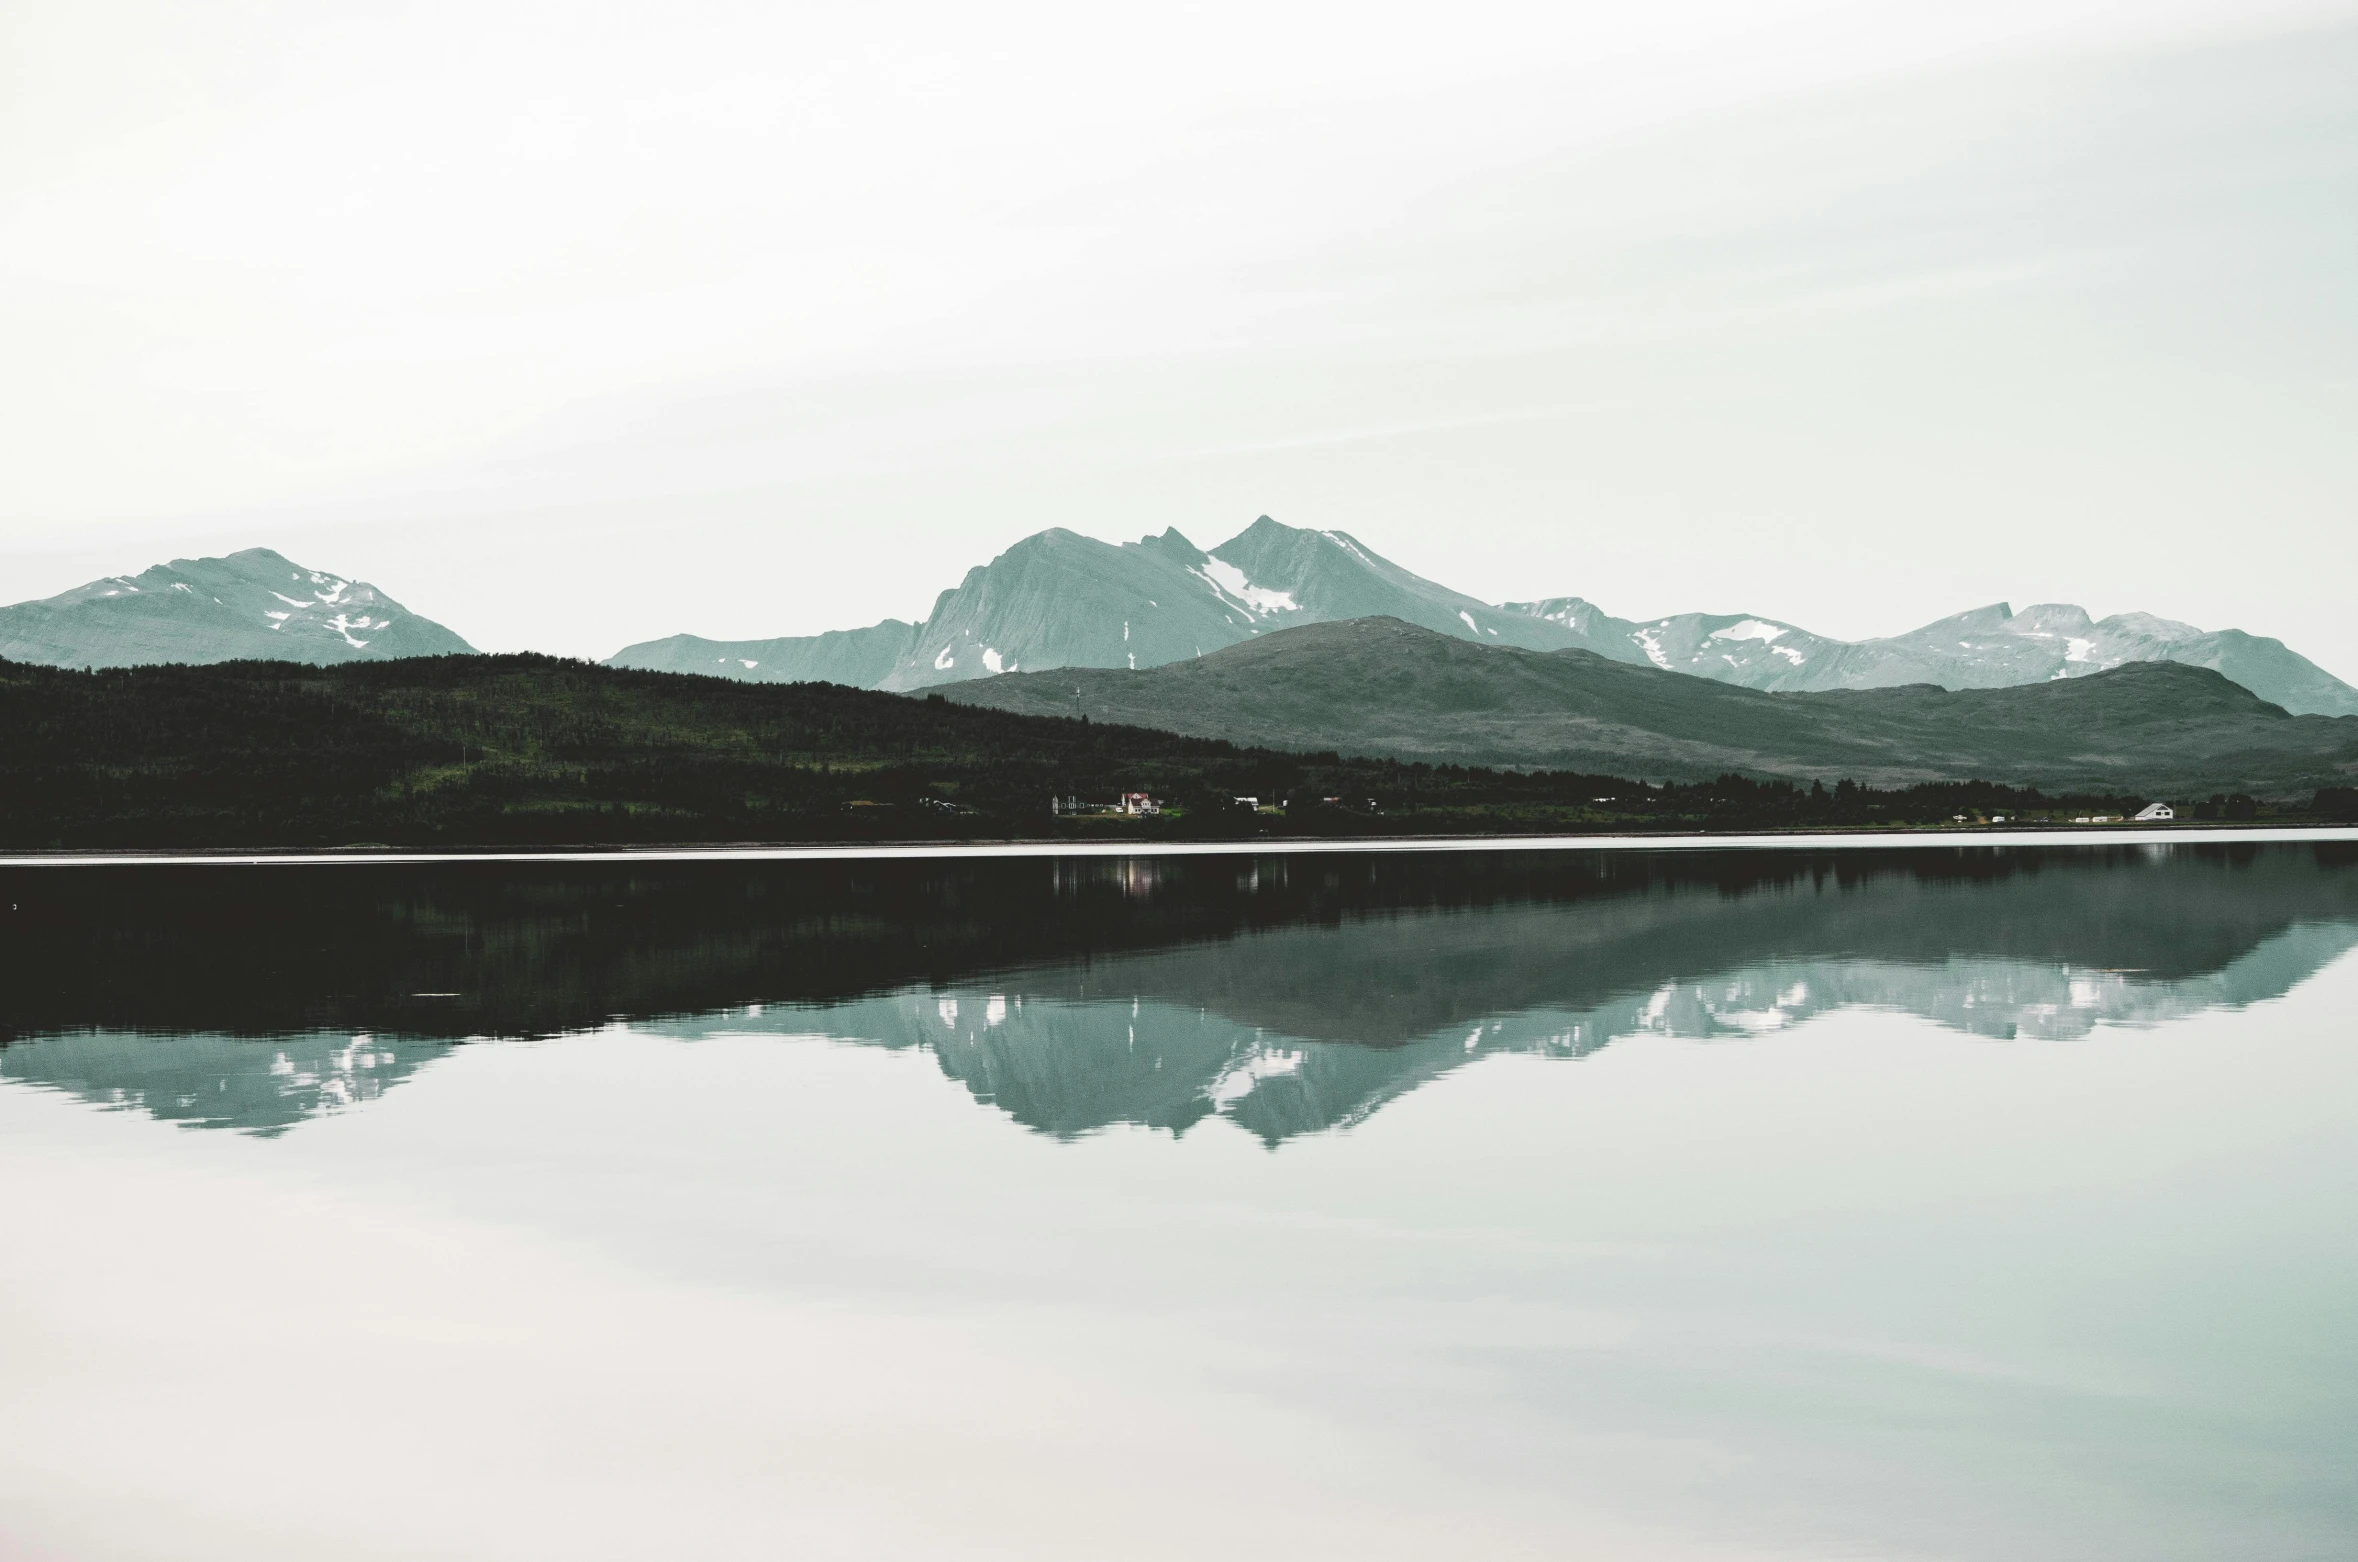 a mountain range sits above the water and reflects its surrounding mountains